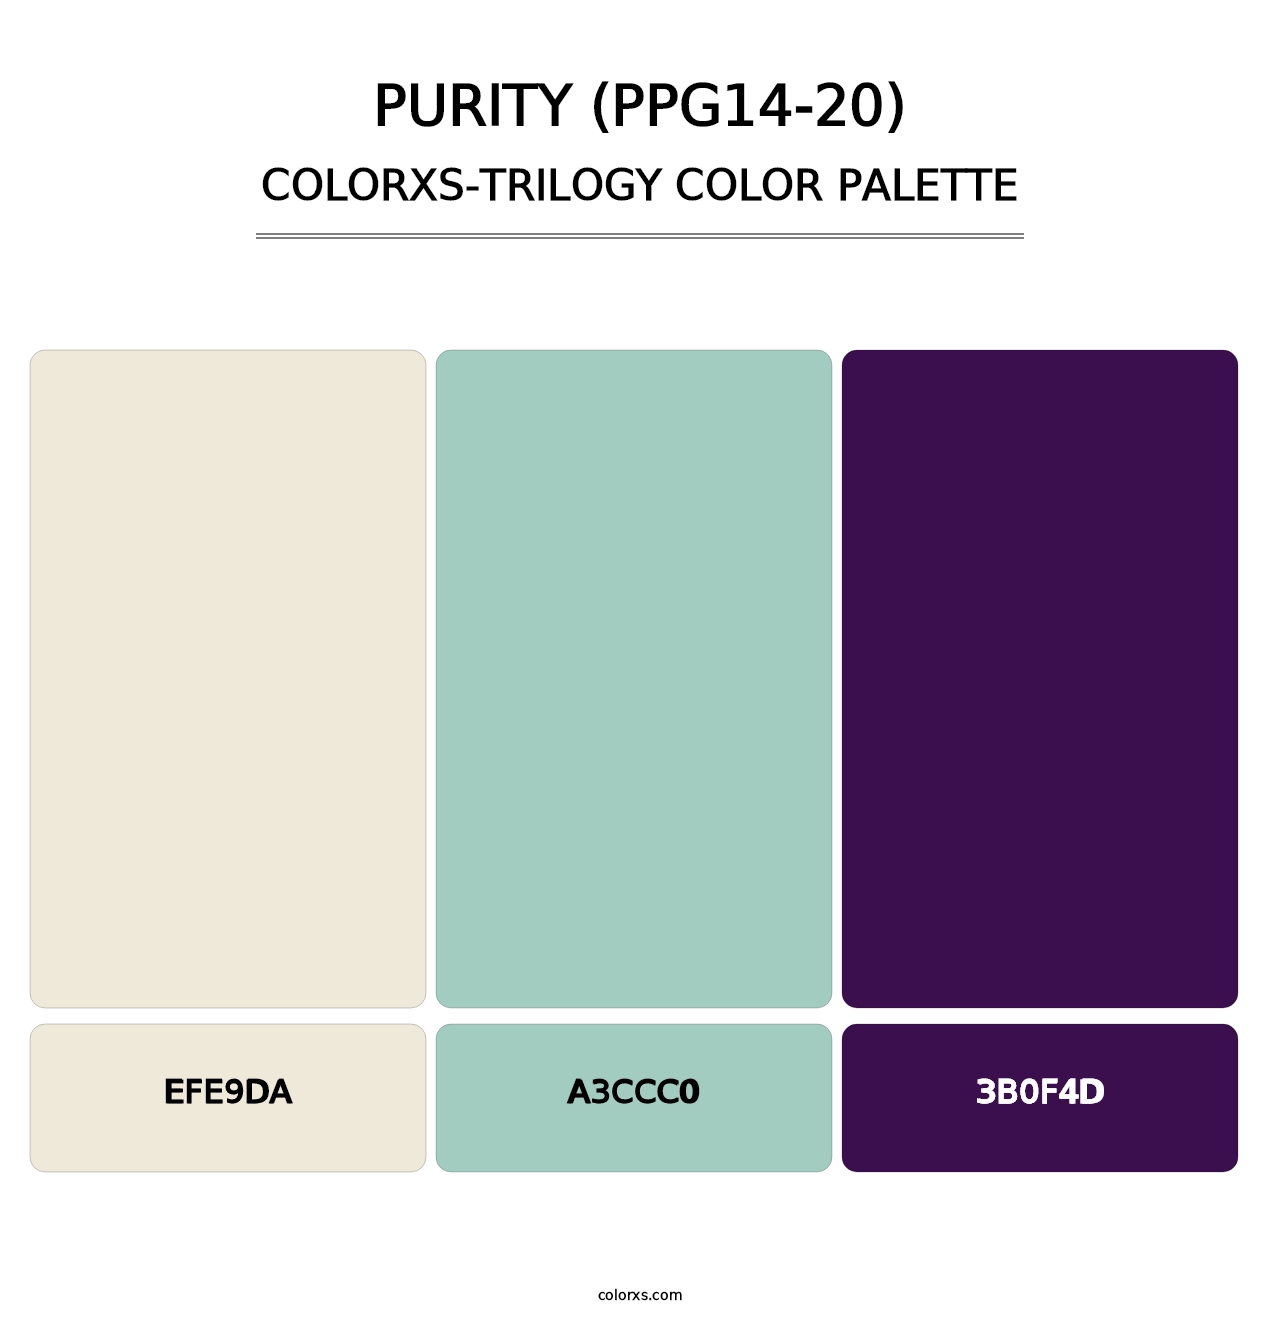 Purity (PPG14-20) - Colorxs Trilogy Palette